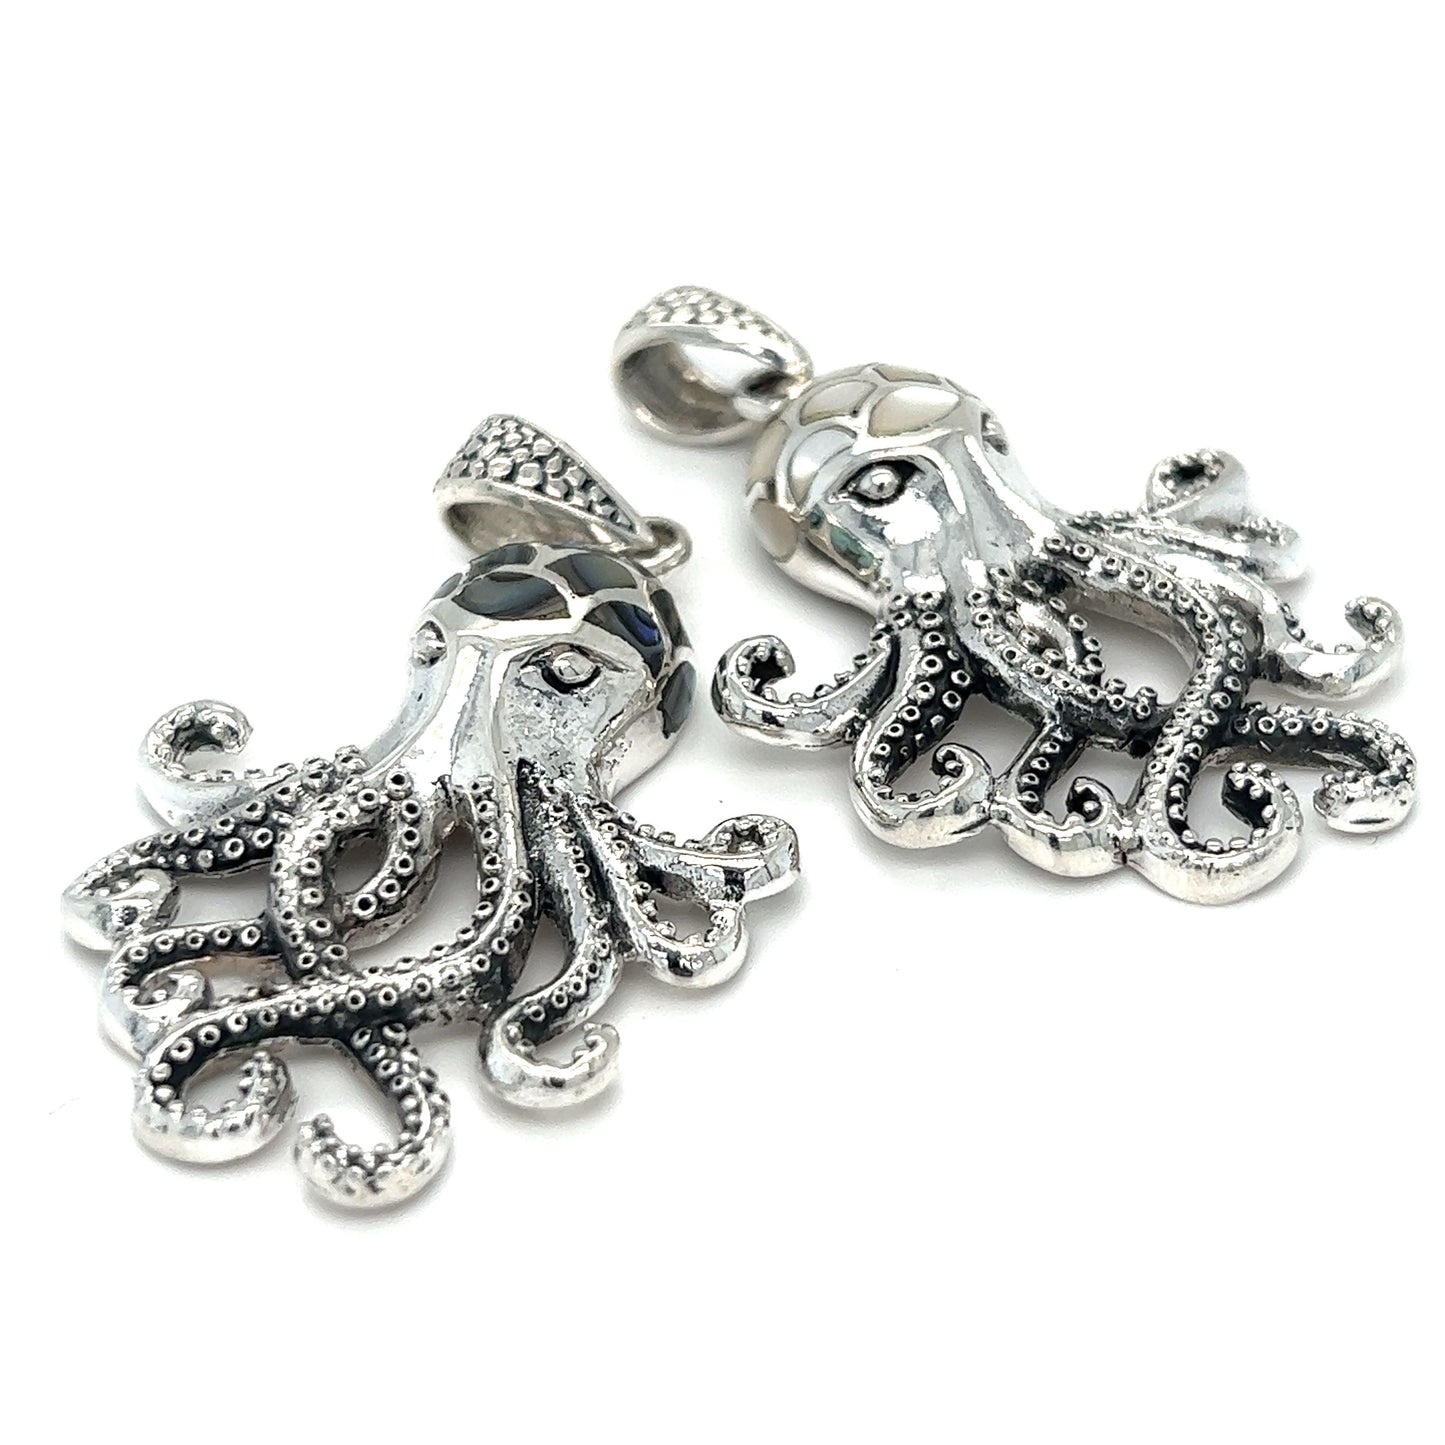 Two Super Silver Statement Octopus Pendants with Inlay Stone details on a white background.